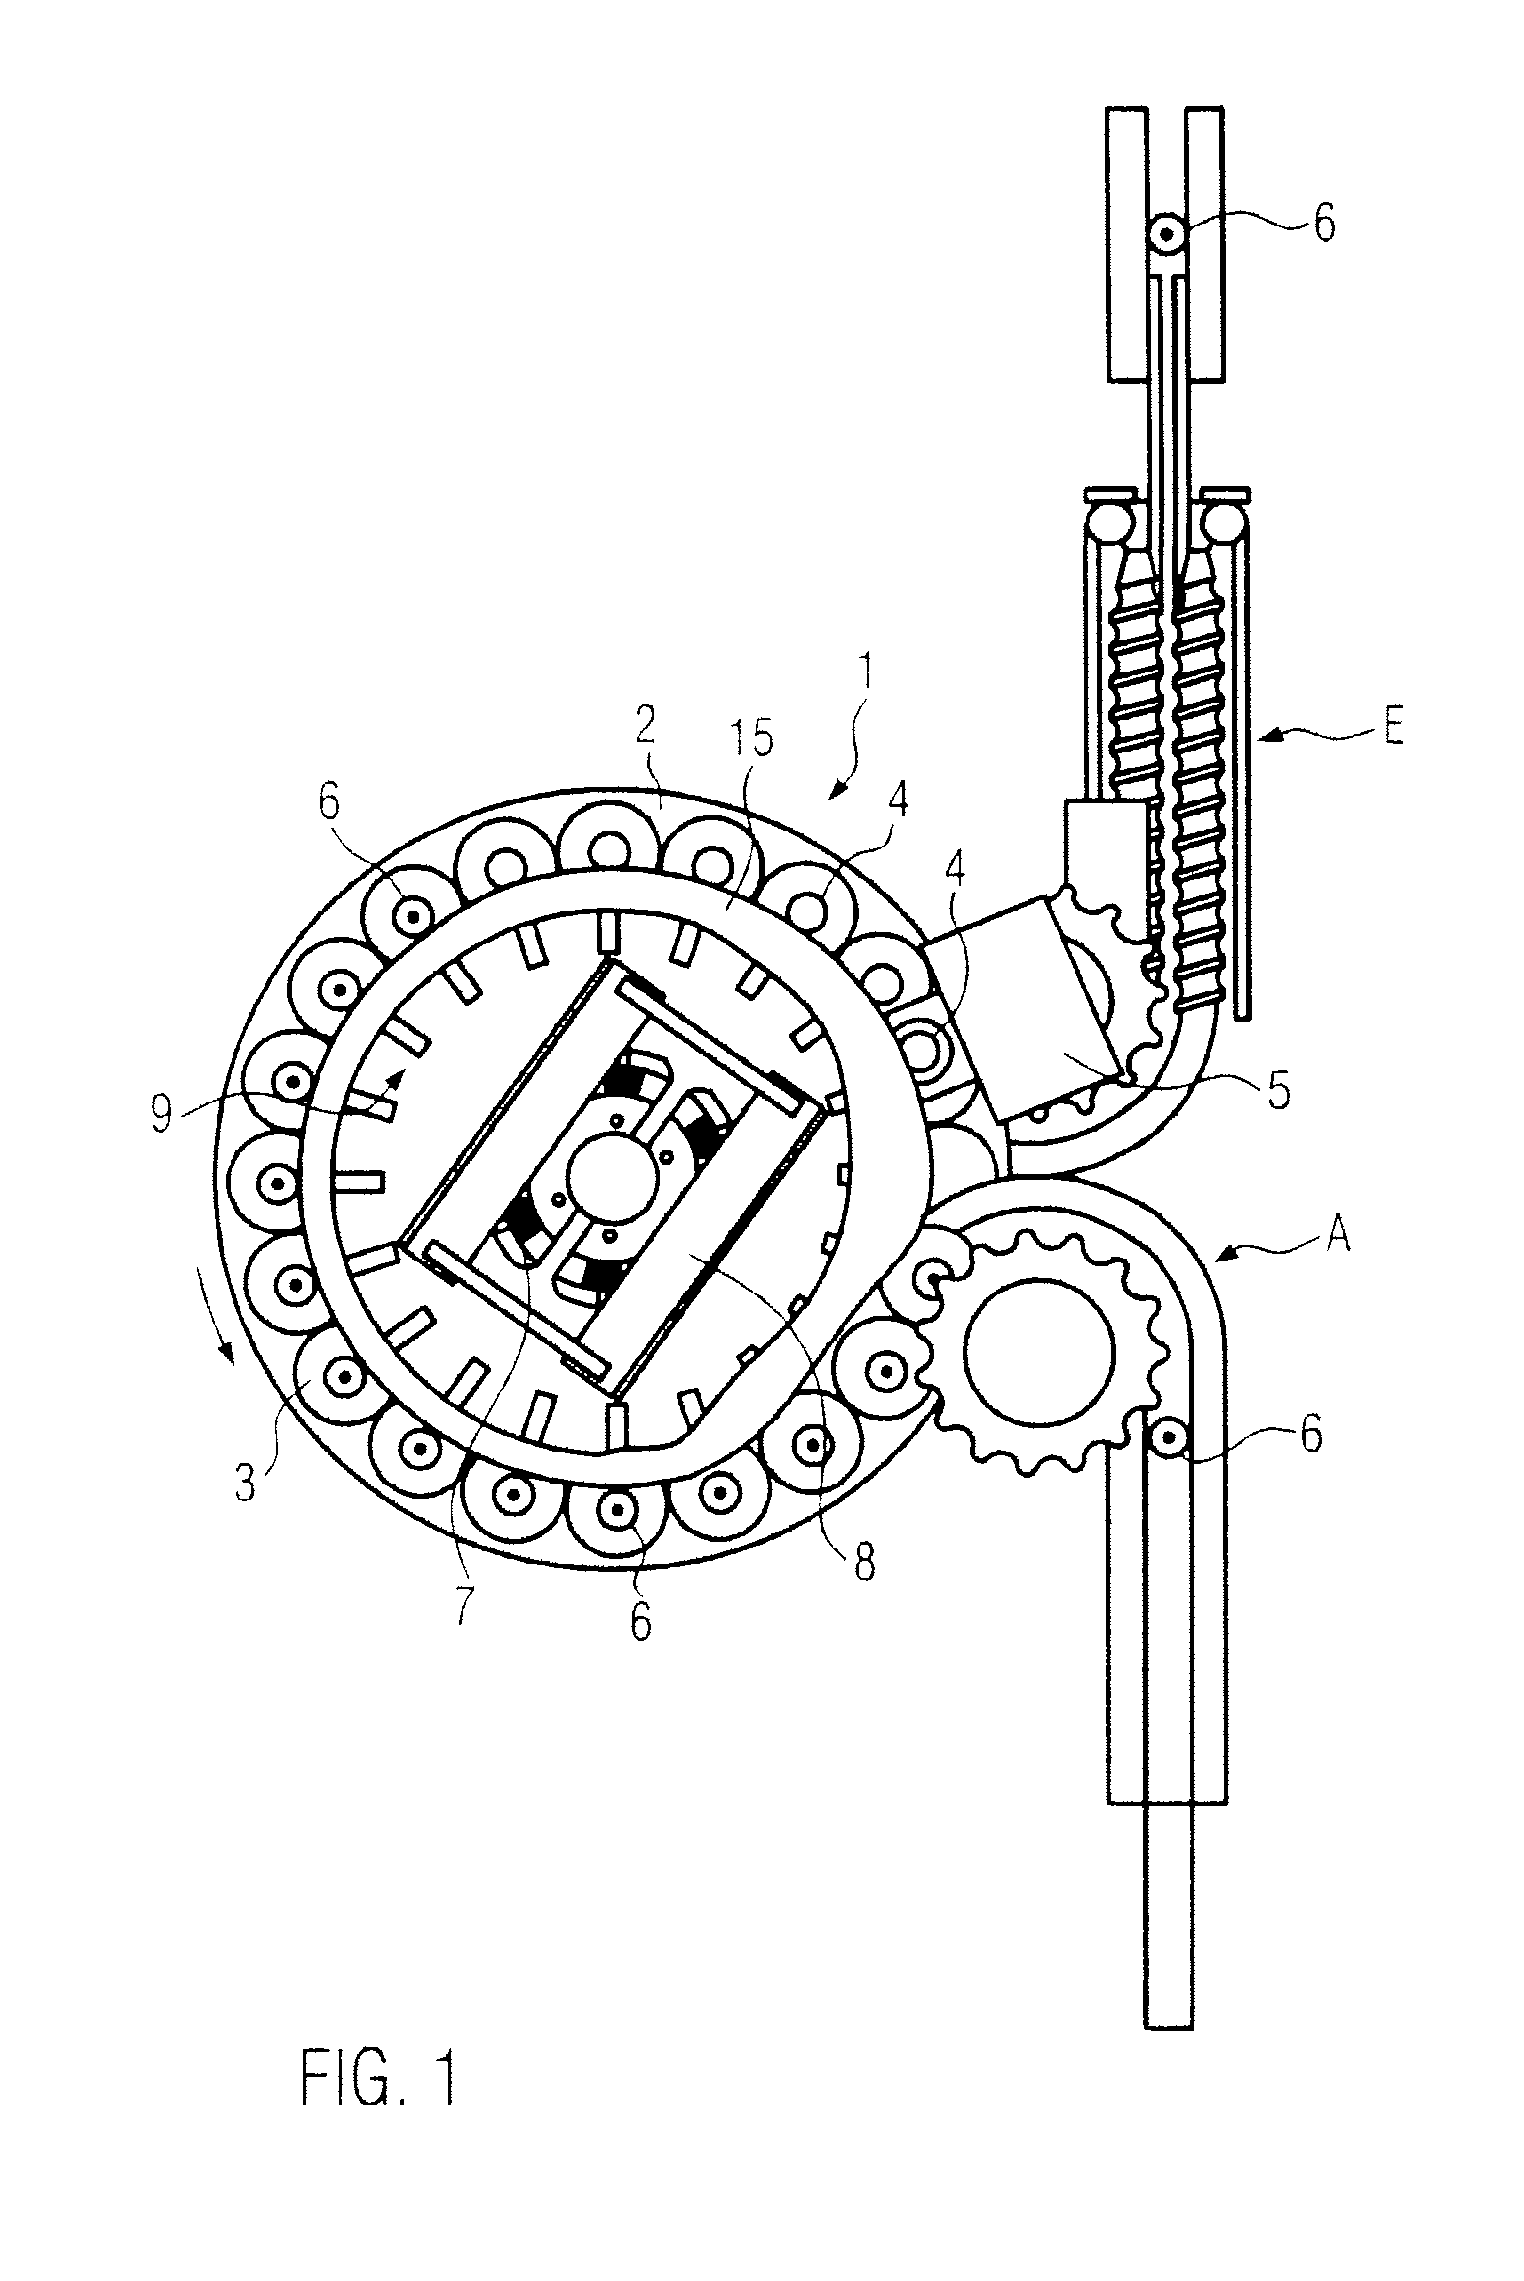 Device and method for applying elastic film sleeves to containers